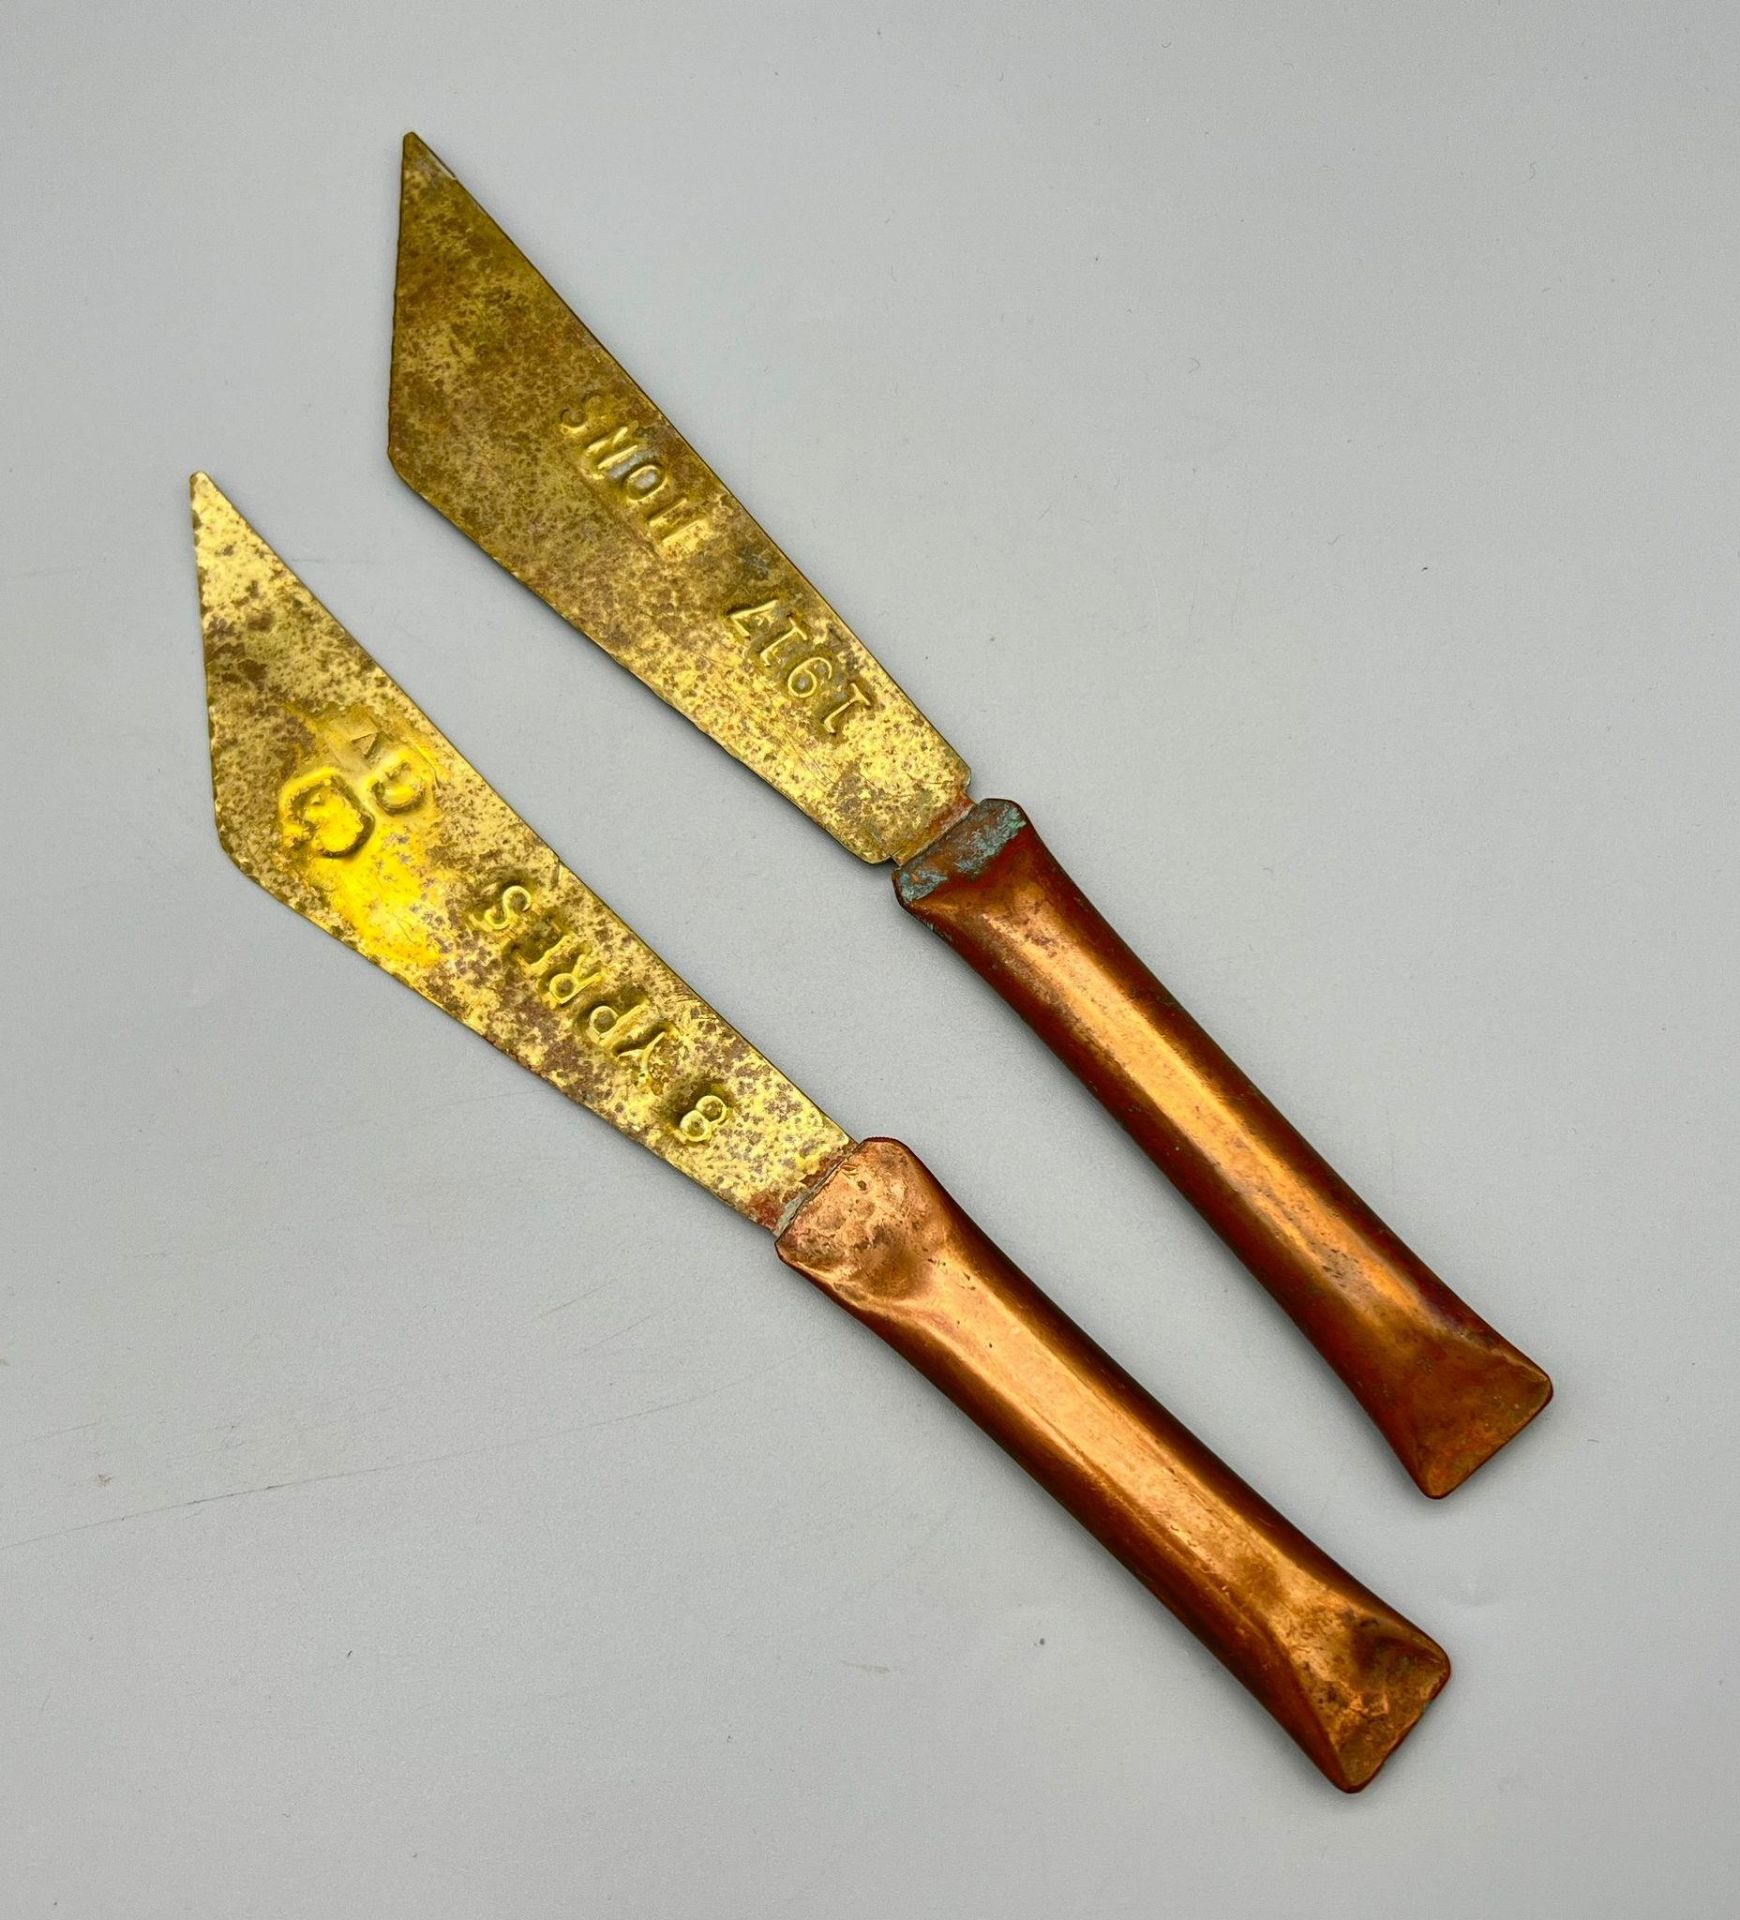 2 Pieces of Trench Art, One For 1917 Mons and The other for Ypres. Each is25cm in length.